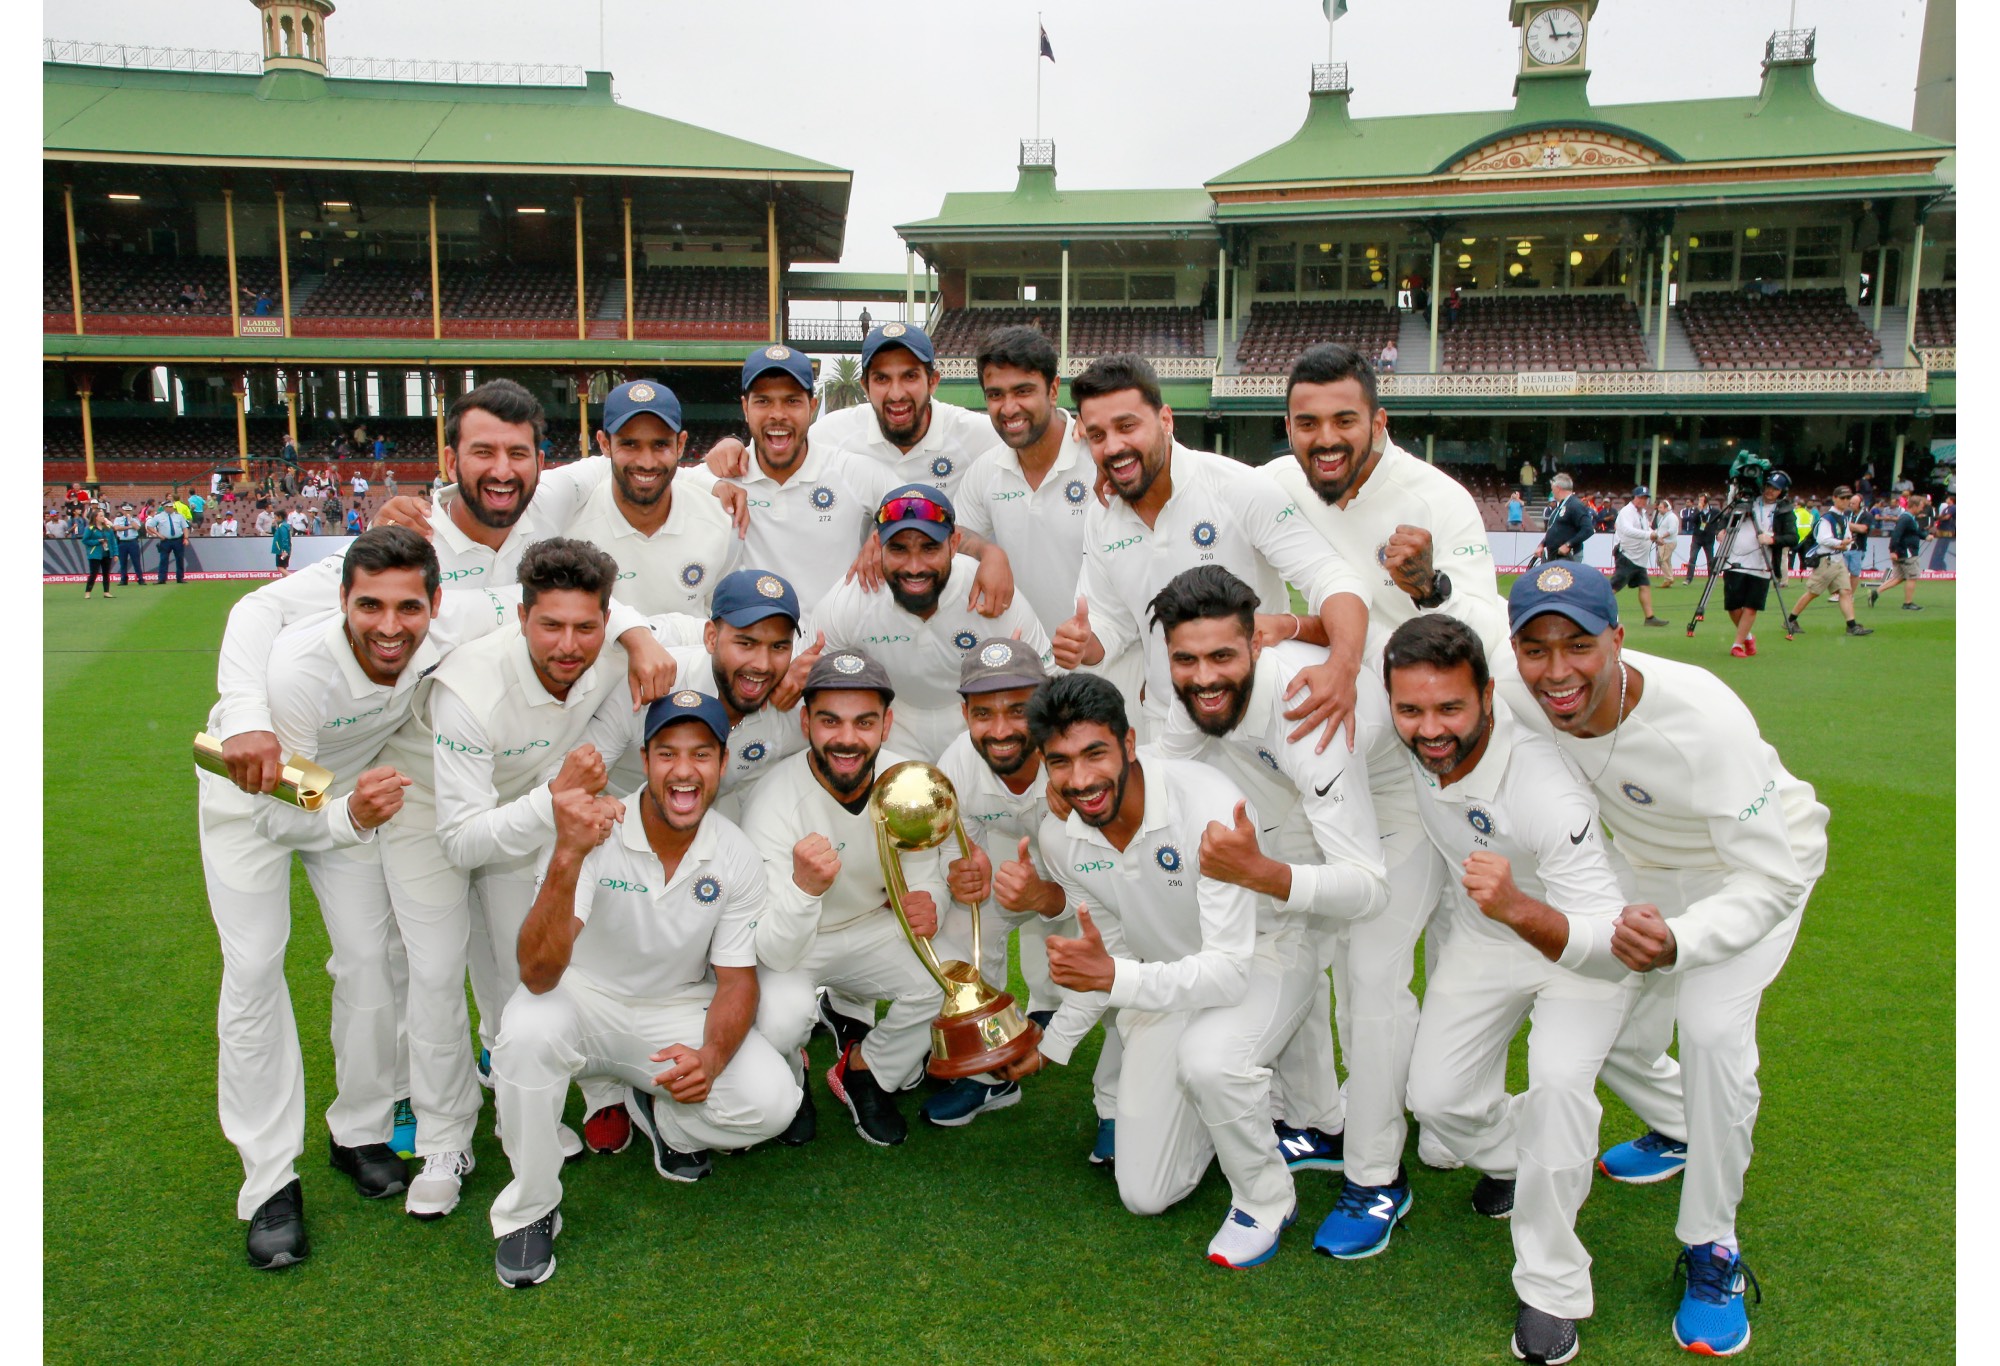 The Indian Cricket Team celebrate winning the Border-Gavaskar trophy during day five of the fourth Test match in the series between Australia and India at Sydney Cricket Ground on January 07, 2019 in Sydney, Australia. (Photo by Mark Evans/Getty Images)